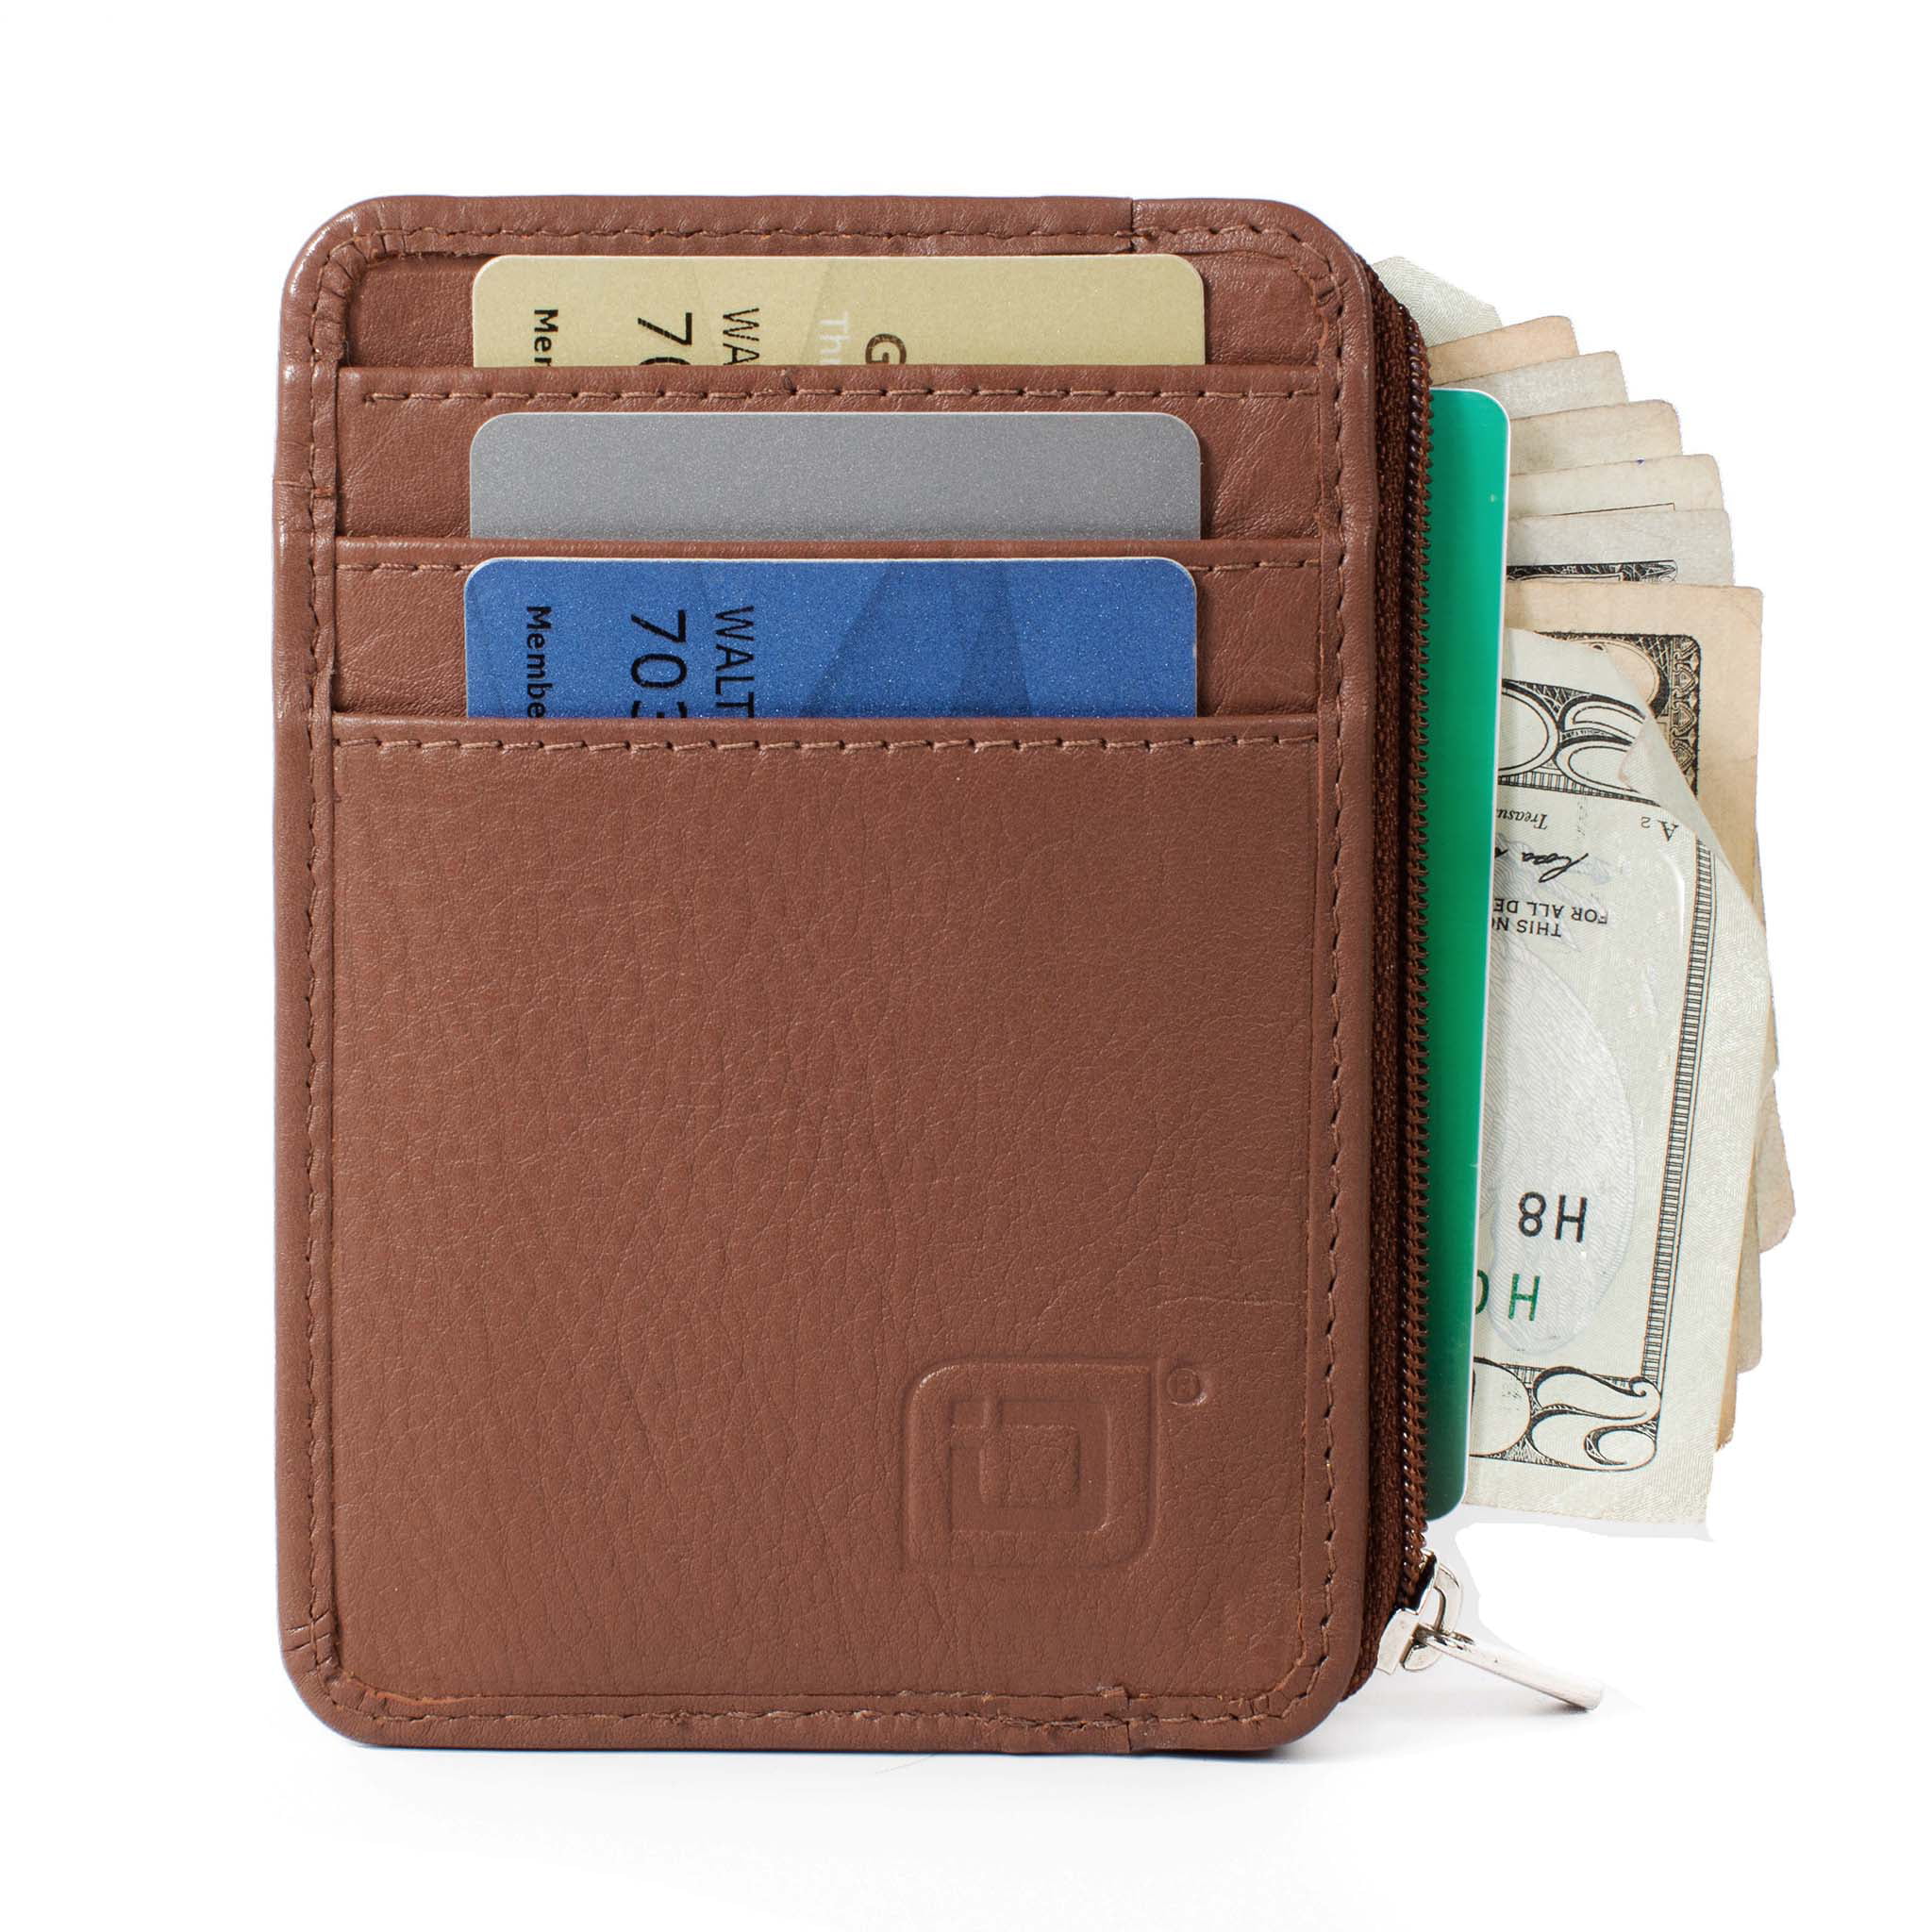 ID Stronghold - ID Stronghold RFID Wallet Mini for Men and Women ...